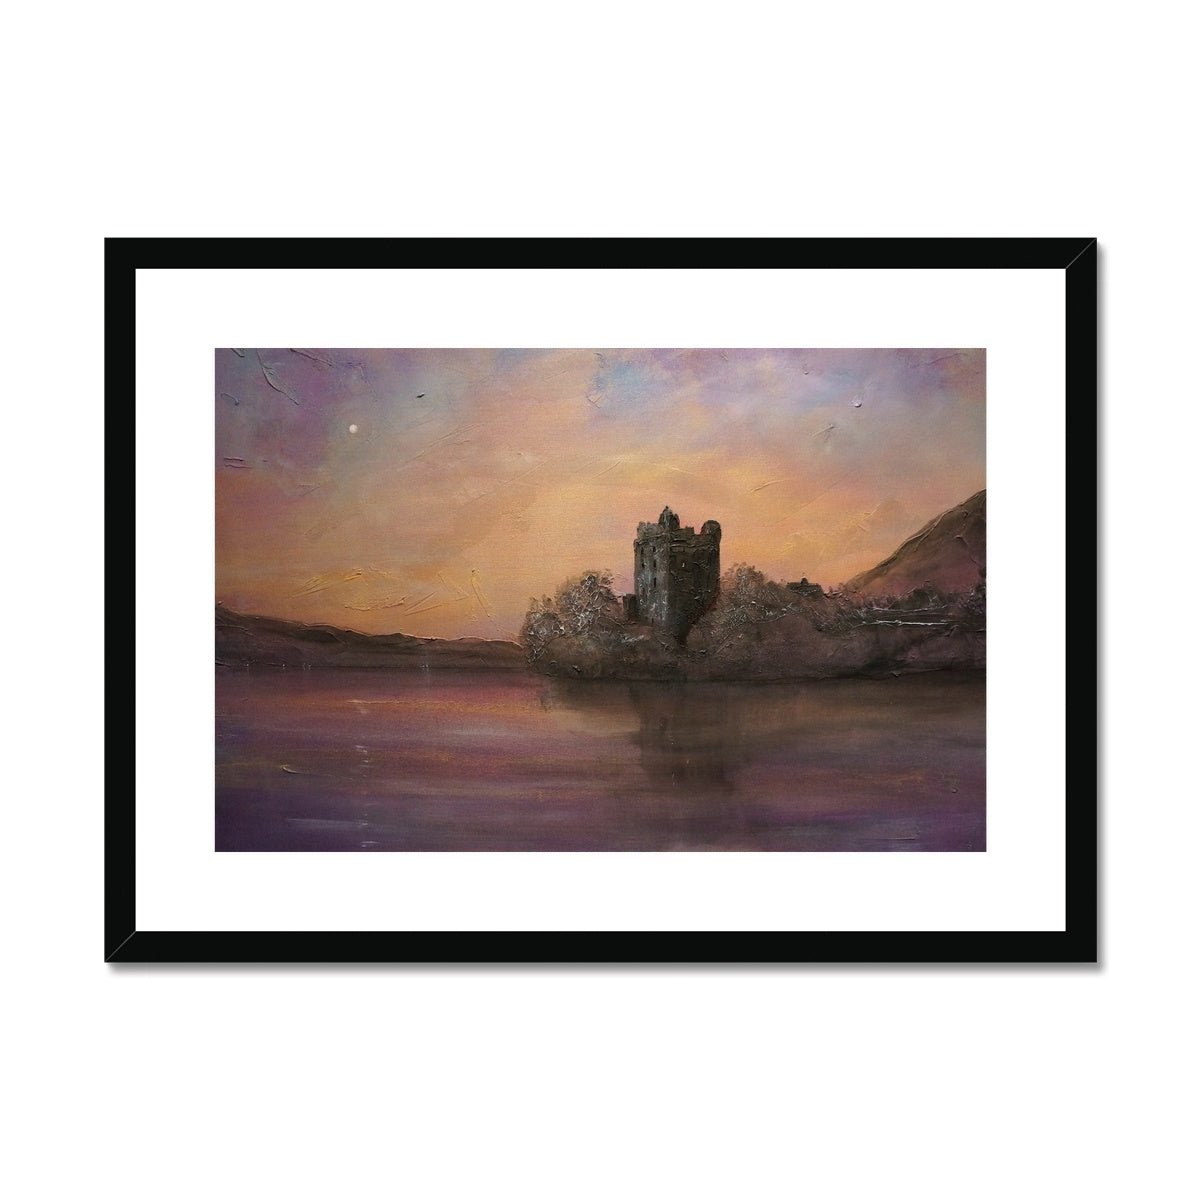 Urquhart Castle Moonlight Painting | Framed & Mounted Prints From Scotland-Framed & Mounted Prints-Historic & Iconic Scotland Art Gallery-A2 Landscape-Black Frame-Paintings, Prints, Homeware, Art Gifts From Scotland By Scottish Artist Kevin Hunter